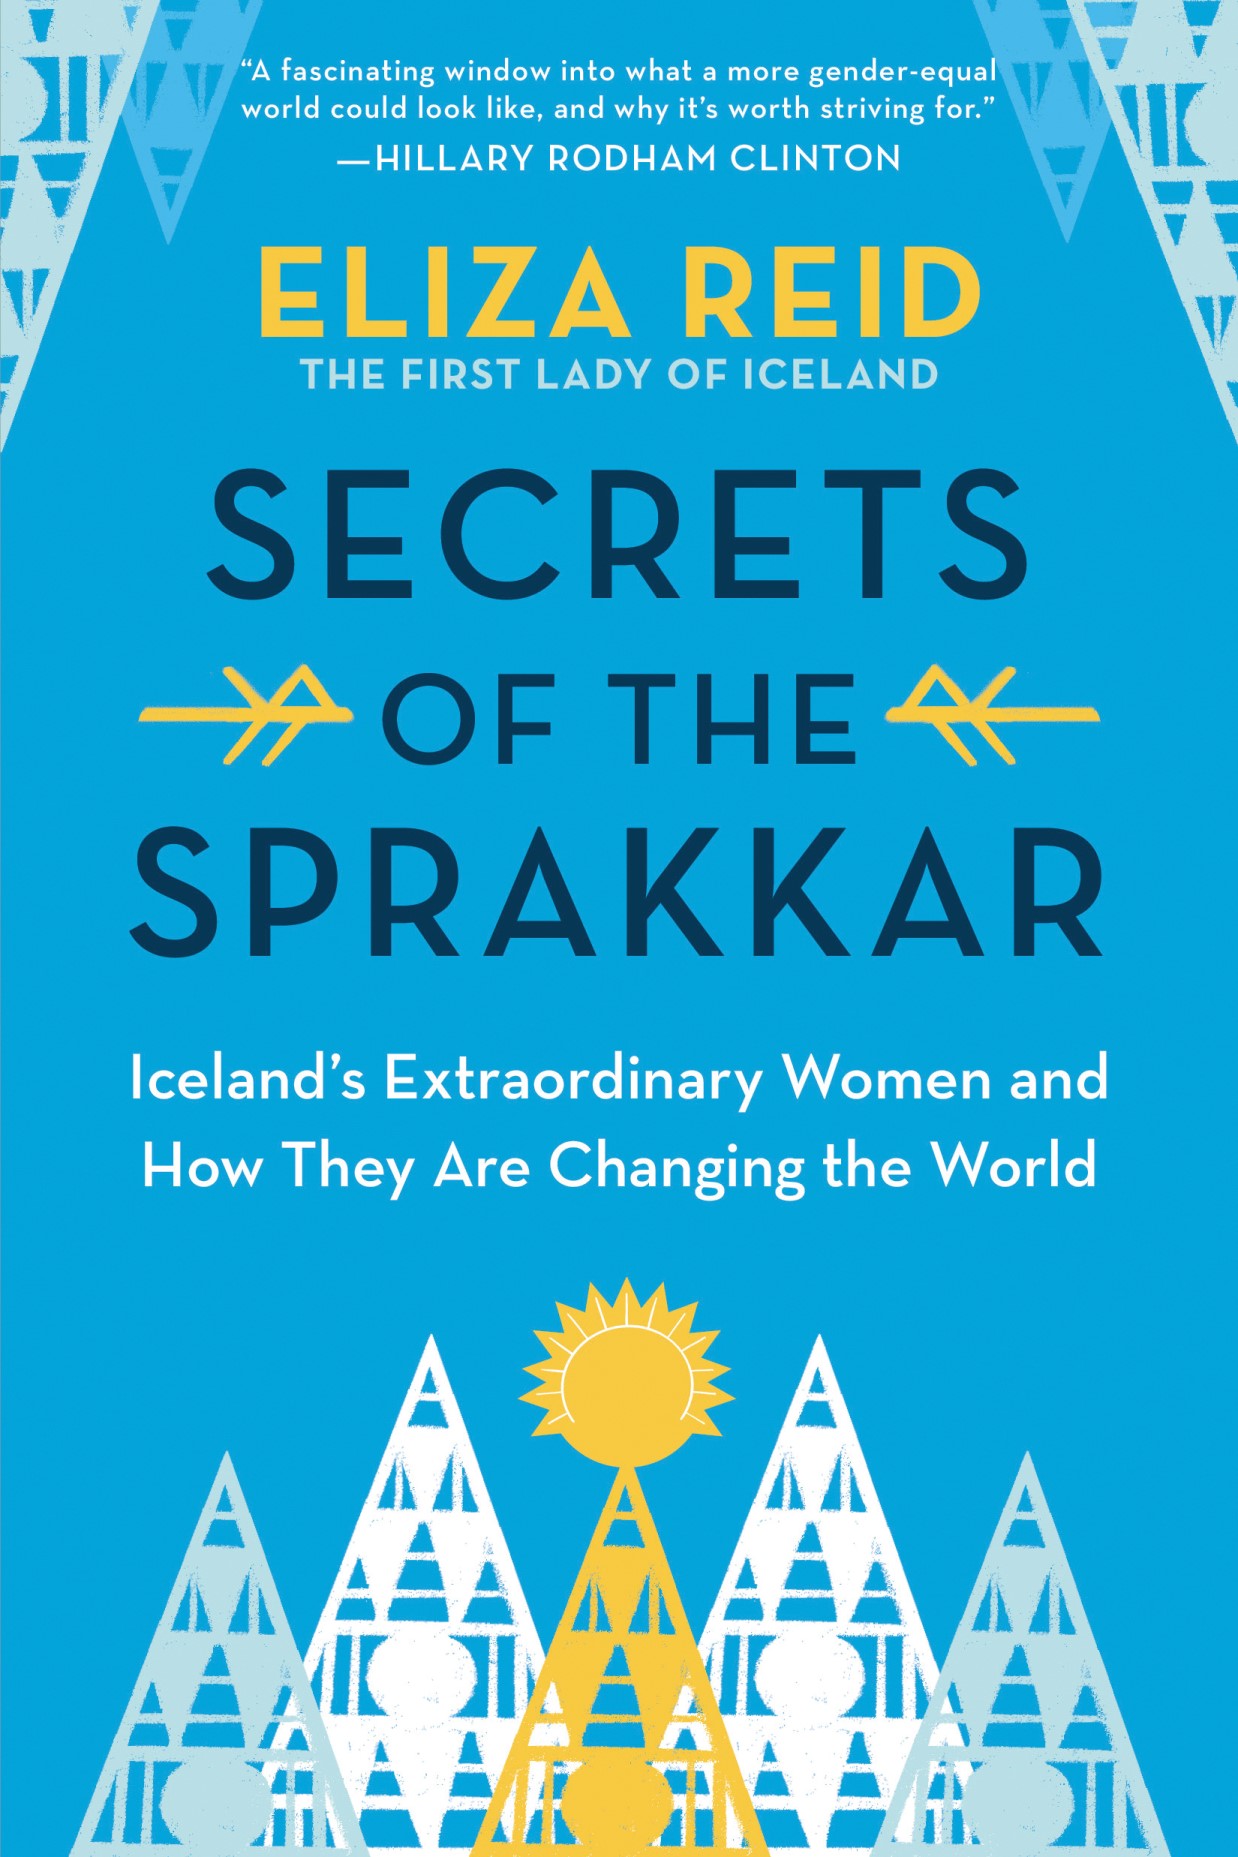 book cover - Secrets of the Sprakkar by Eliza Reid, subtitled 'Iceland's extraordinary women and how they are changing the world